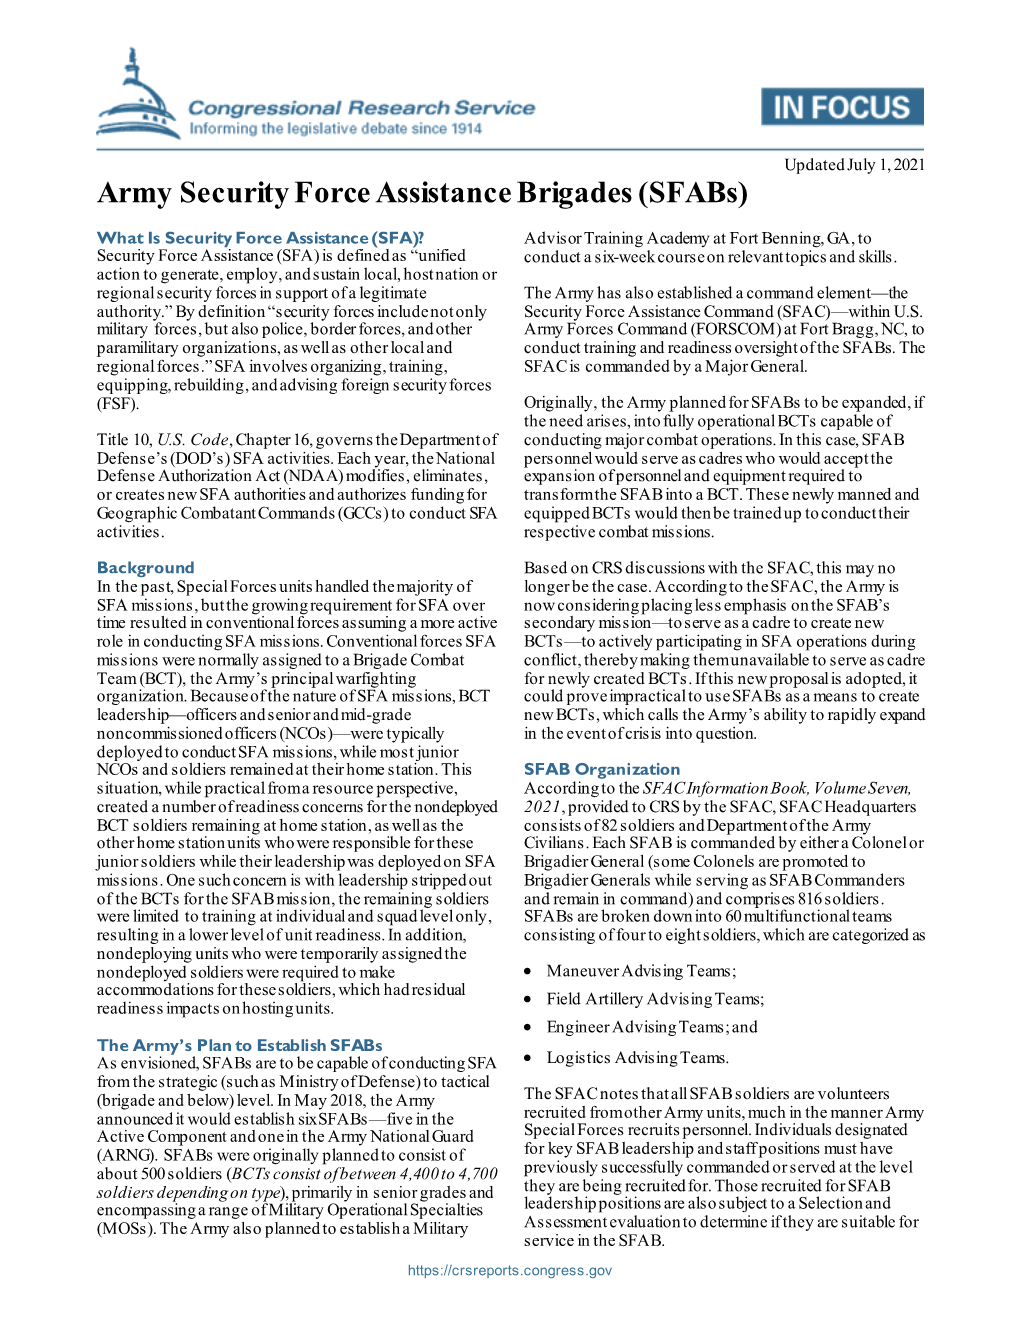 Army Security Force Assistance Brigades (Sfabs)